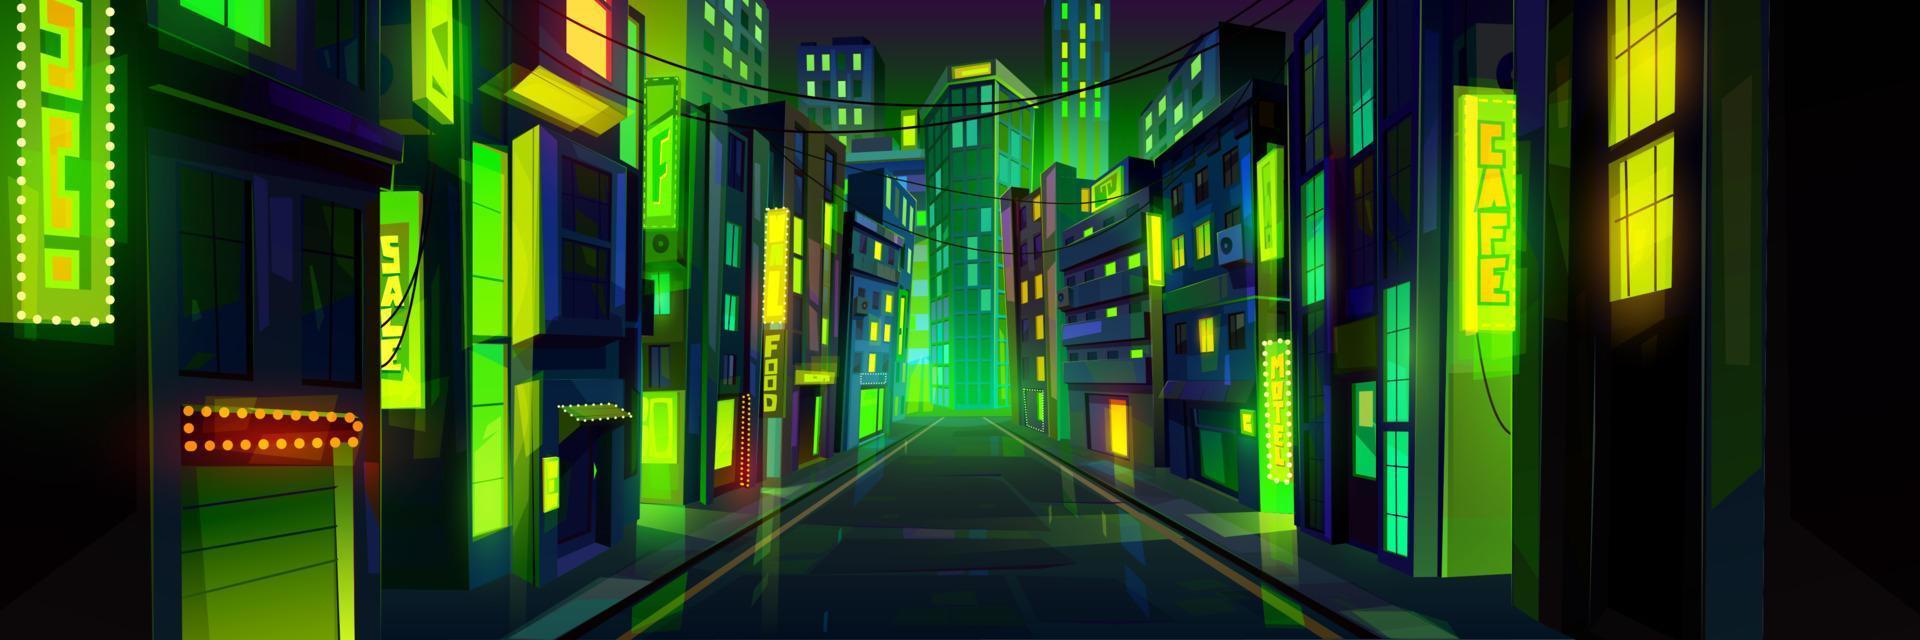 Night city street with road and green neon glow vector